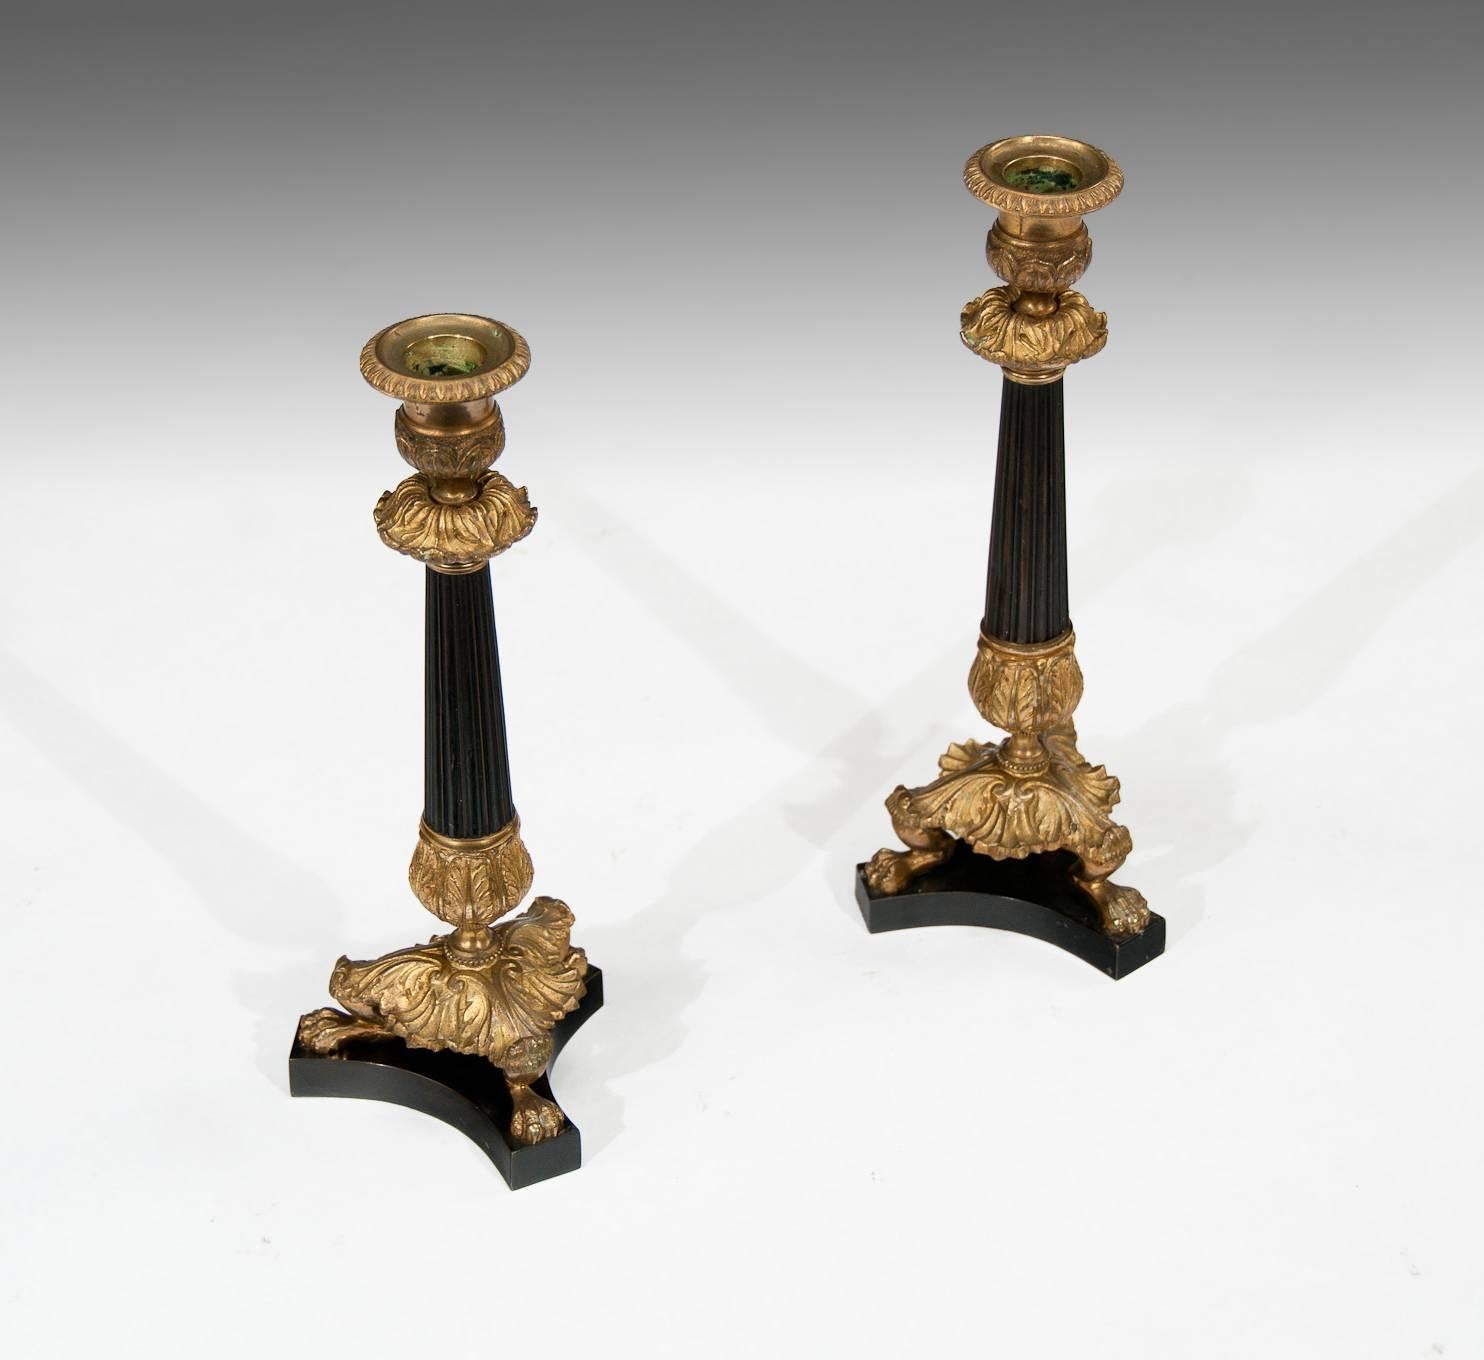 Empire Revival Good Decorative Pair of Bronze and Gilt French Candlesticks